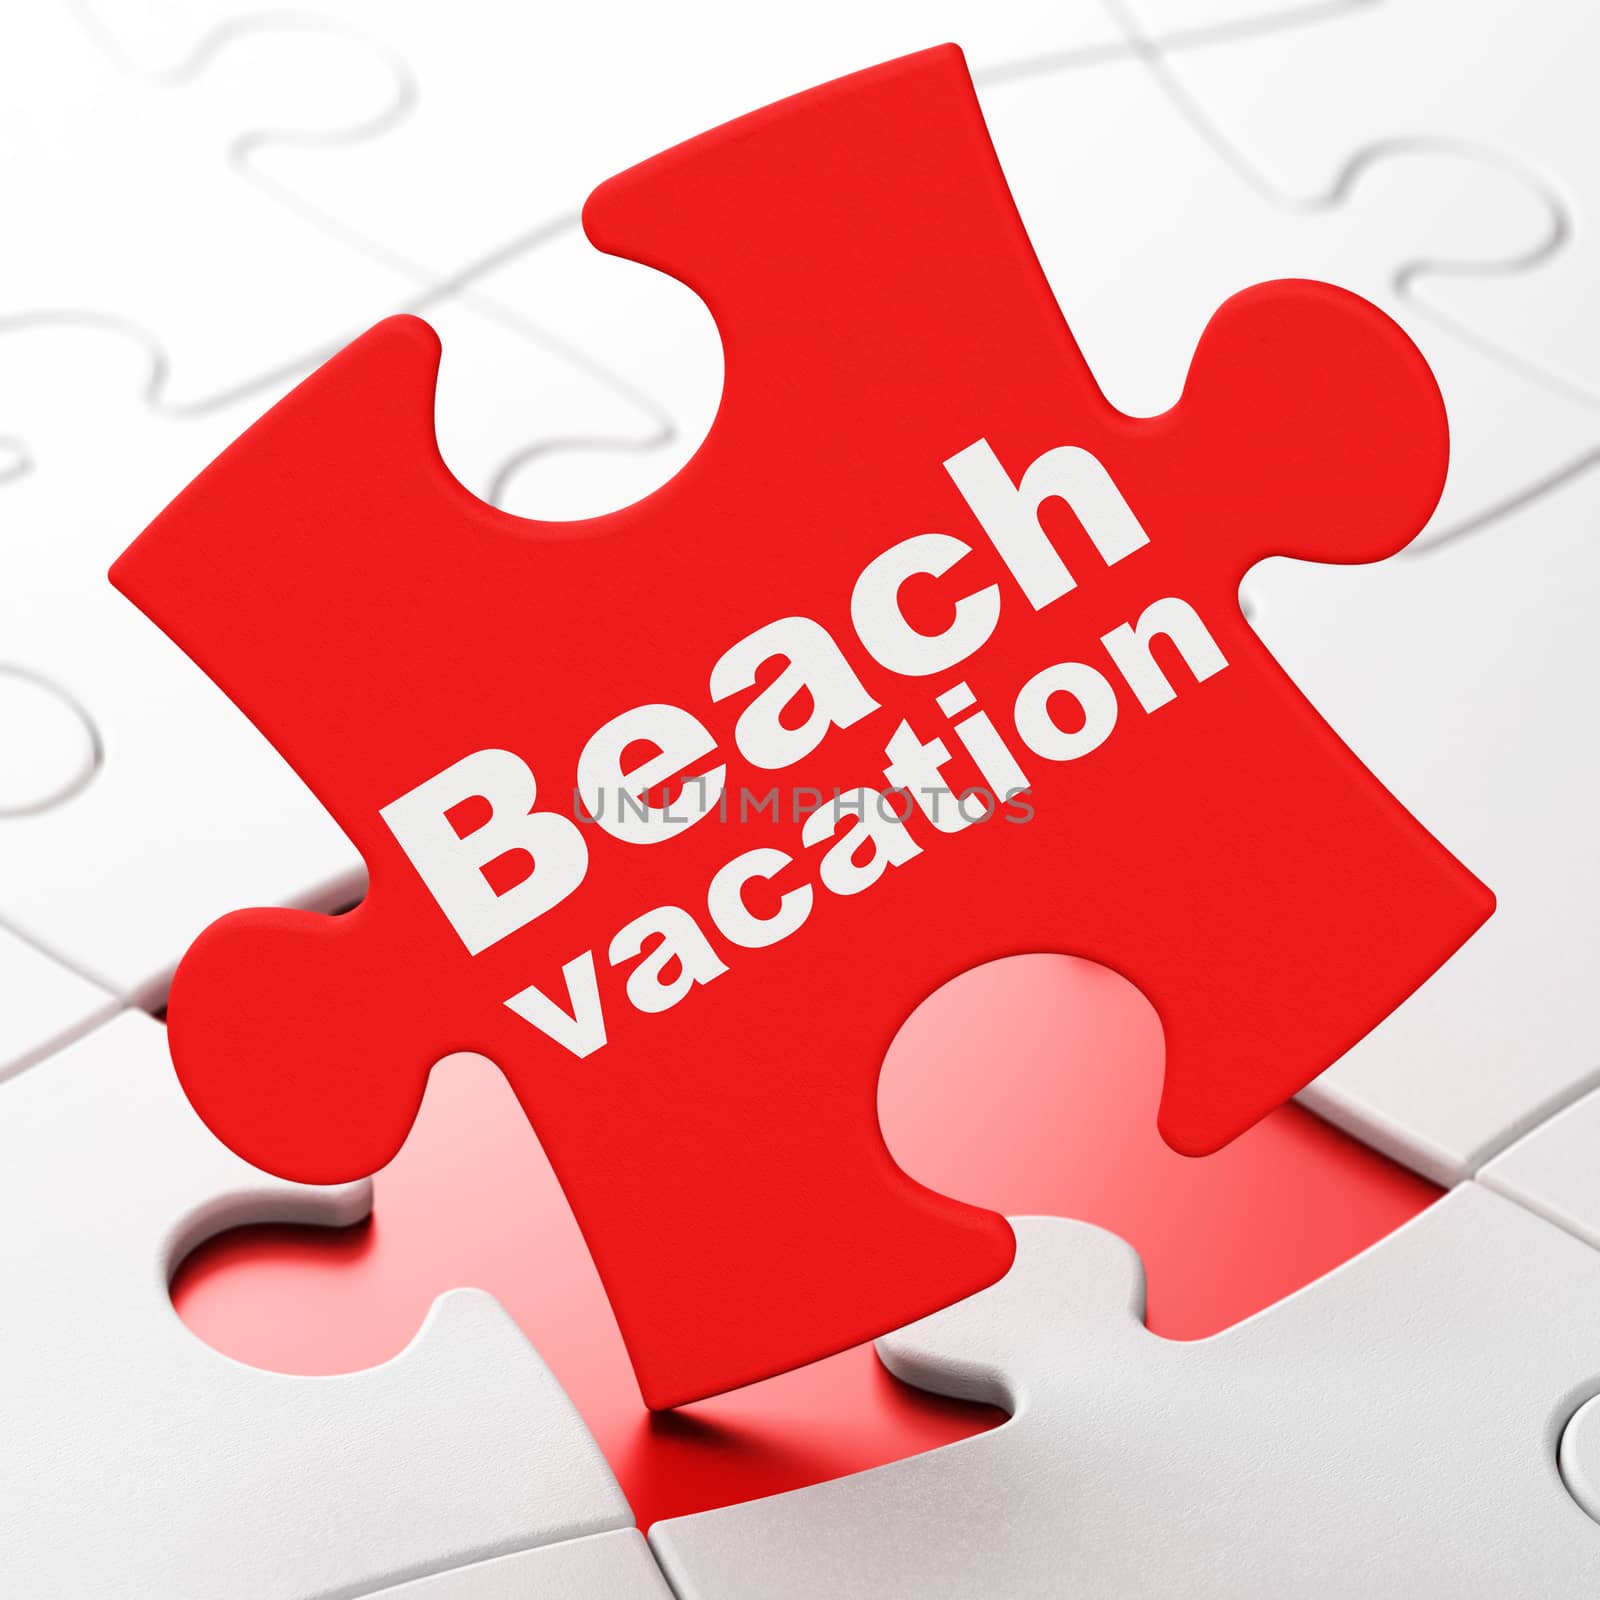 Tourism concept: Beach Vacation on Red puzzle pieces background, 3D rendering